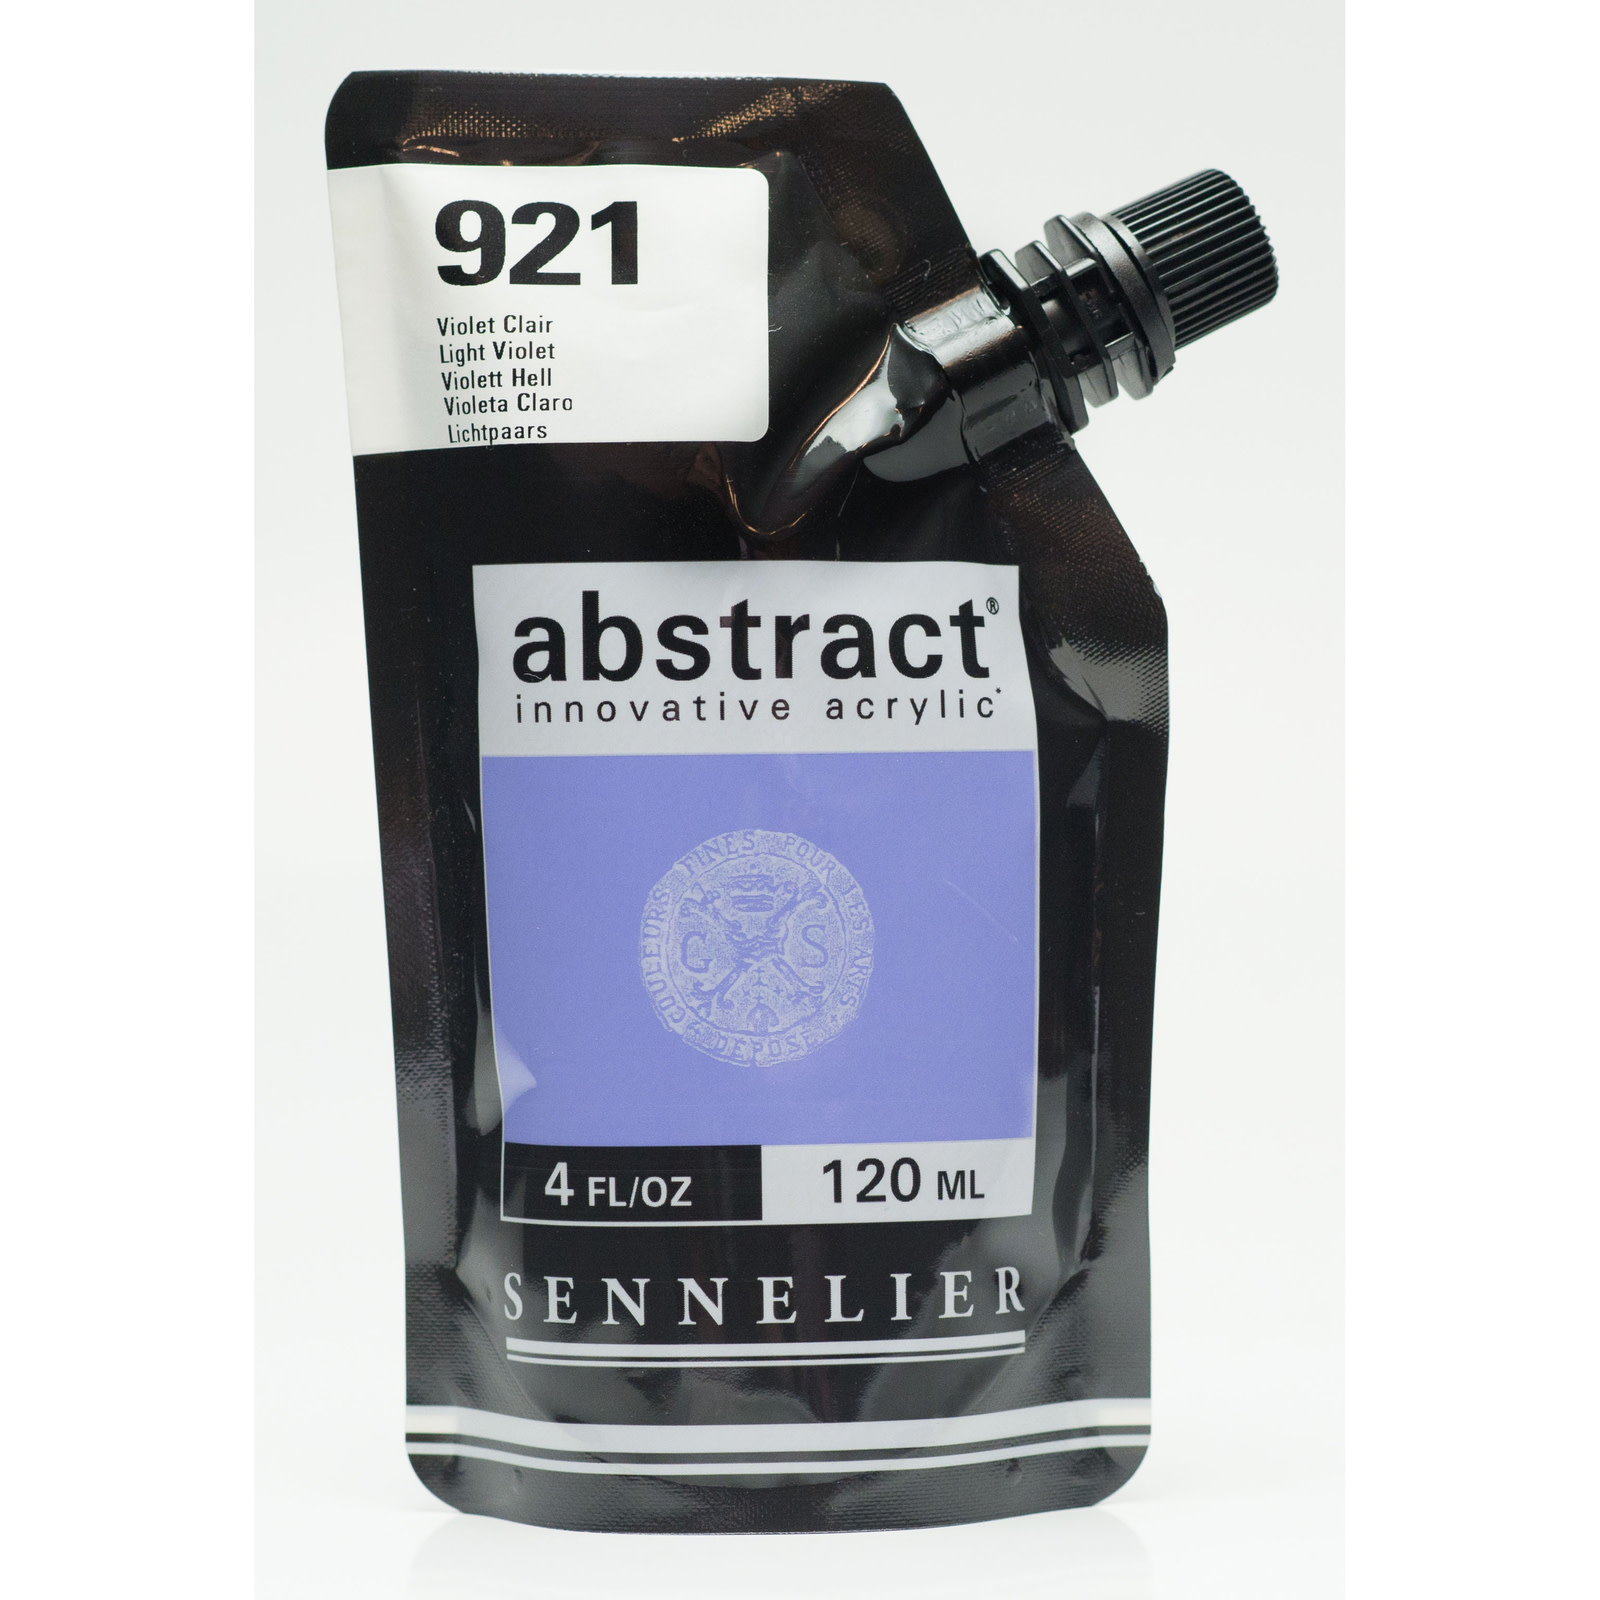 Sennelier Abstract Acrylics 120ML Light Violet